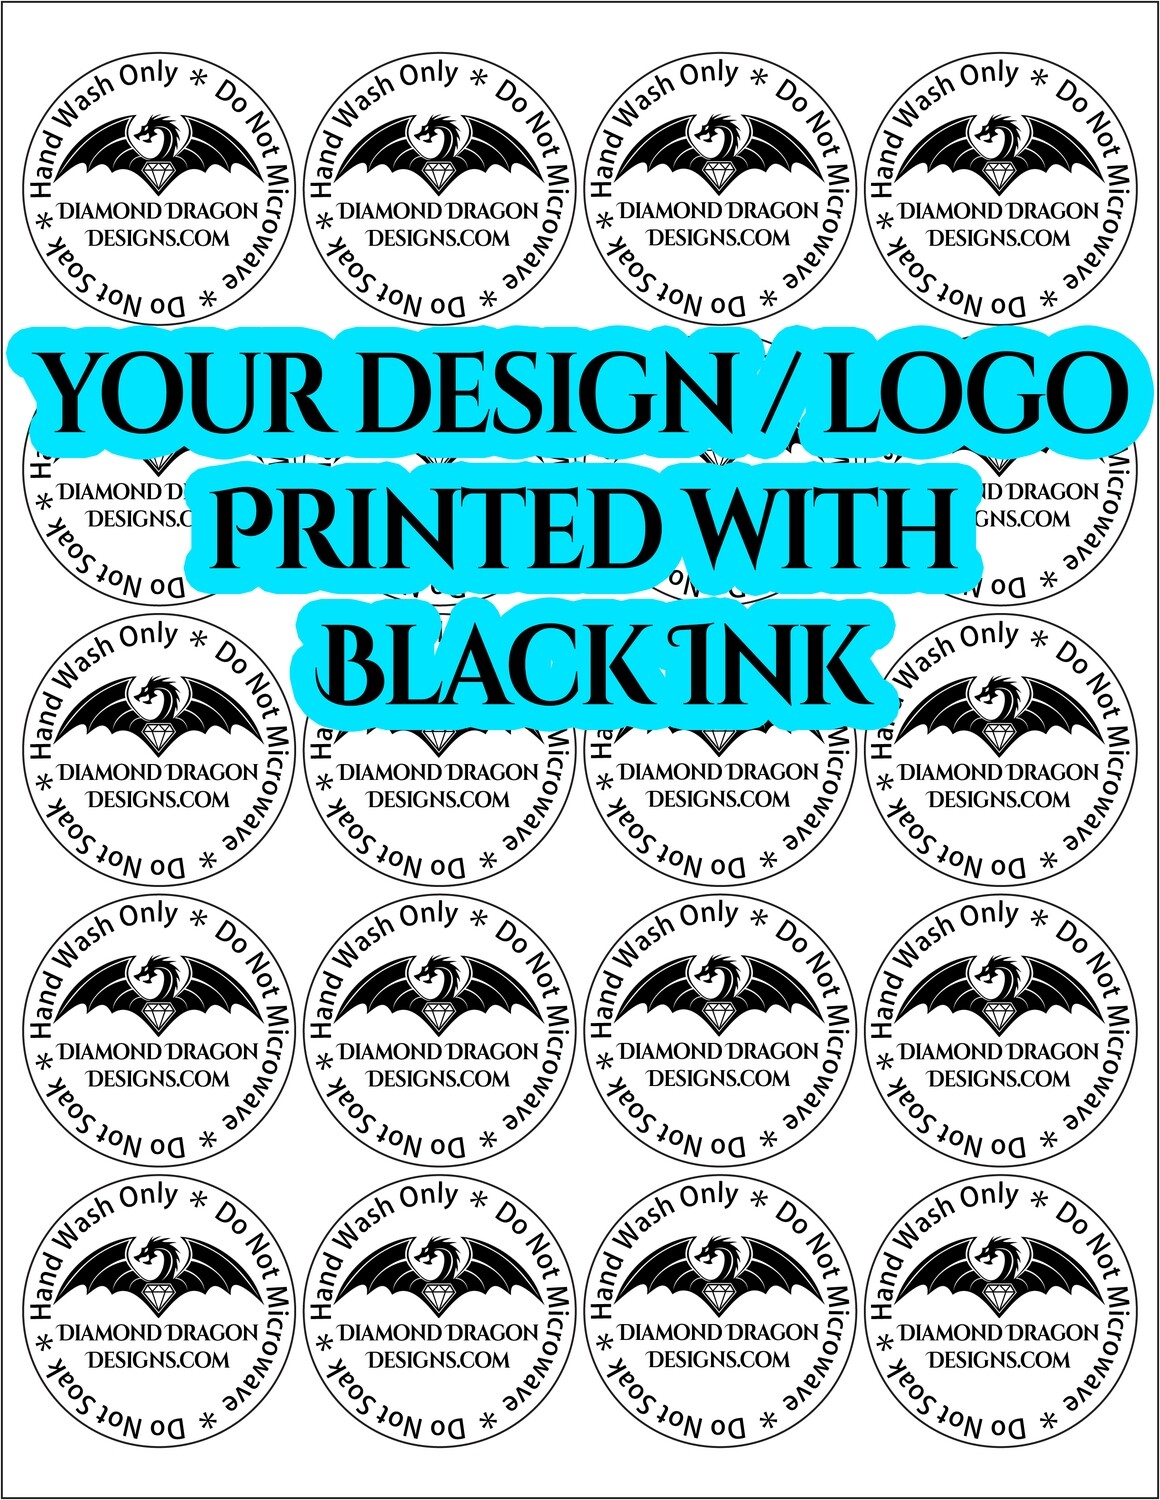 Full Page - 2'' Circle, BLACK INK, Clear STICKER, Care Instruction / Business Logo - 20 Clear Stickers